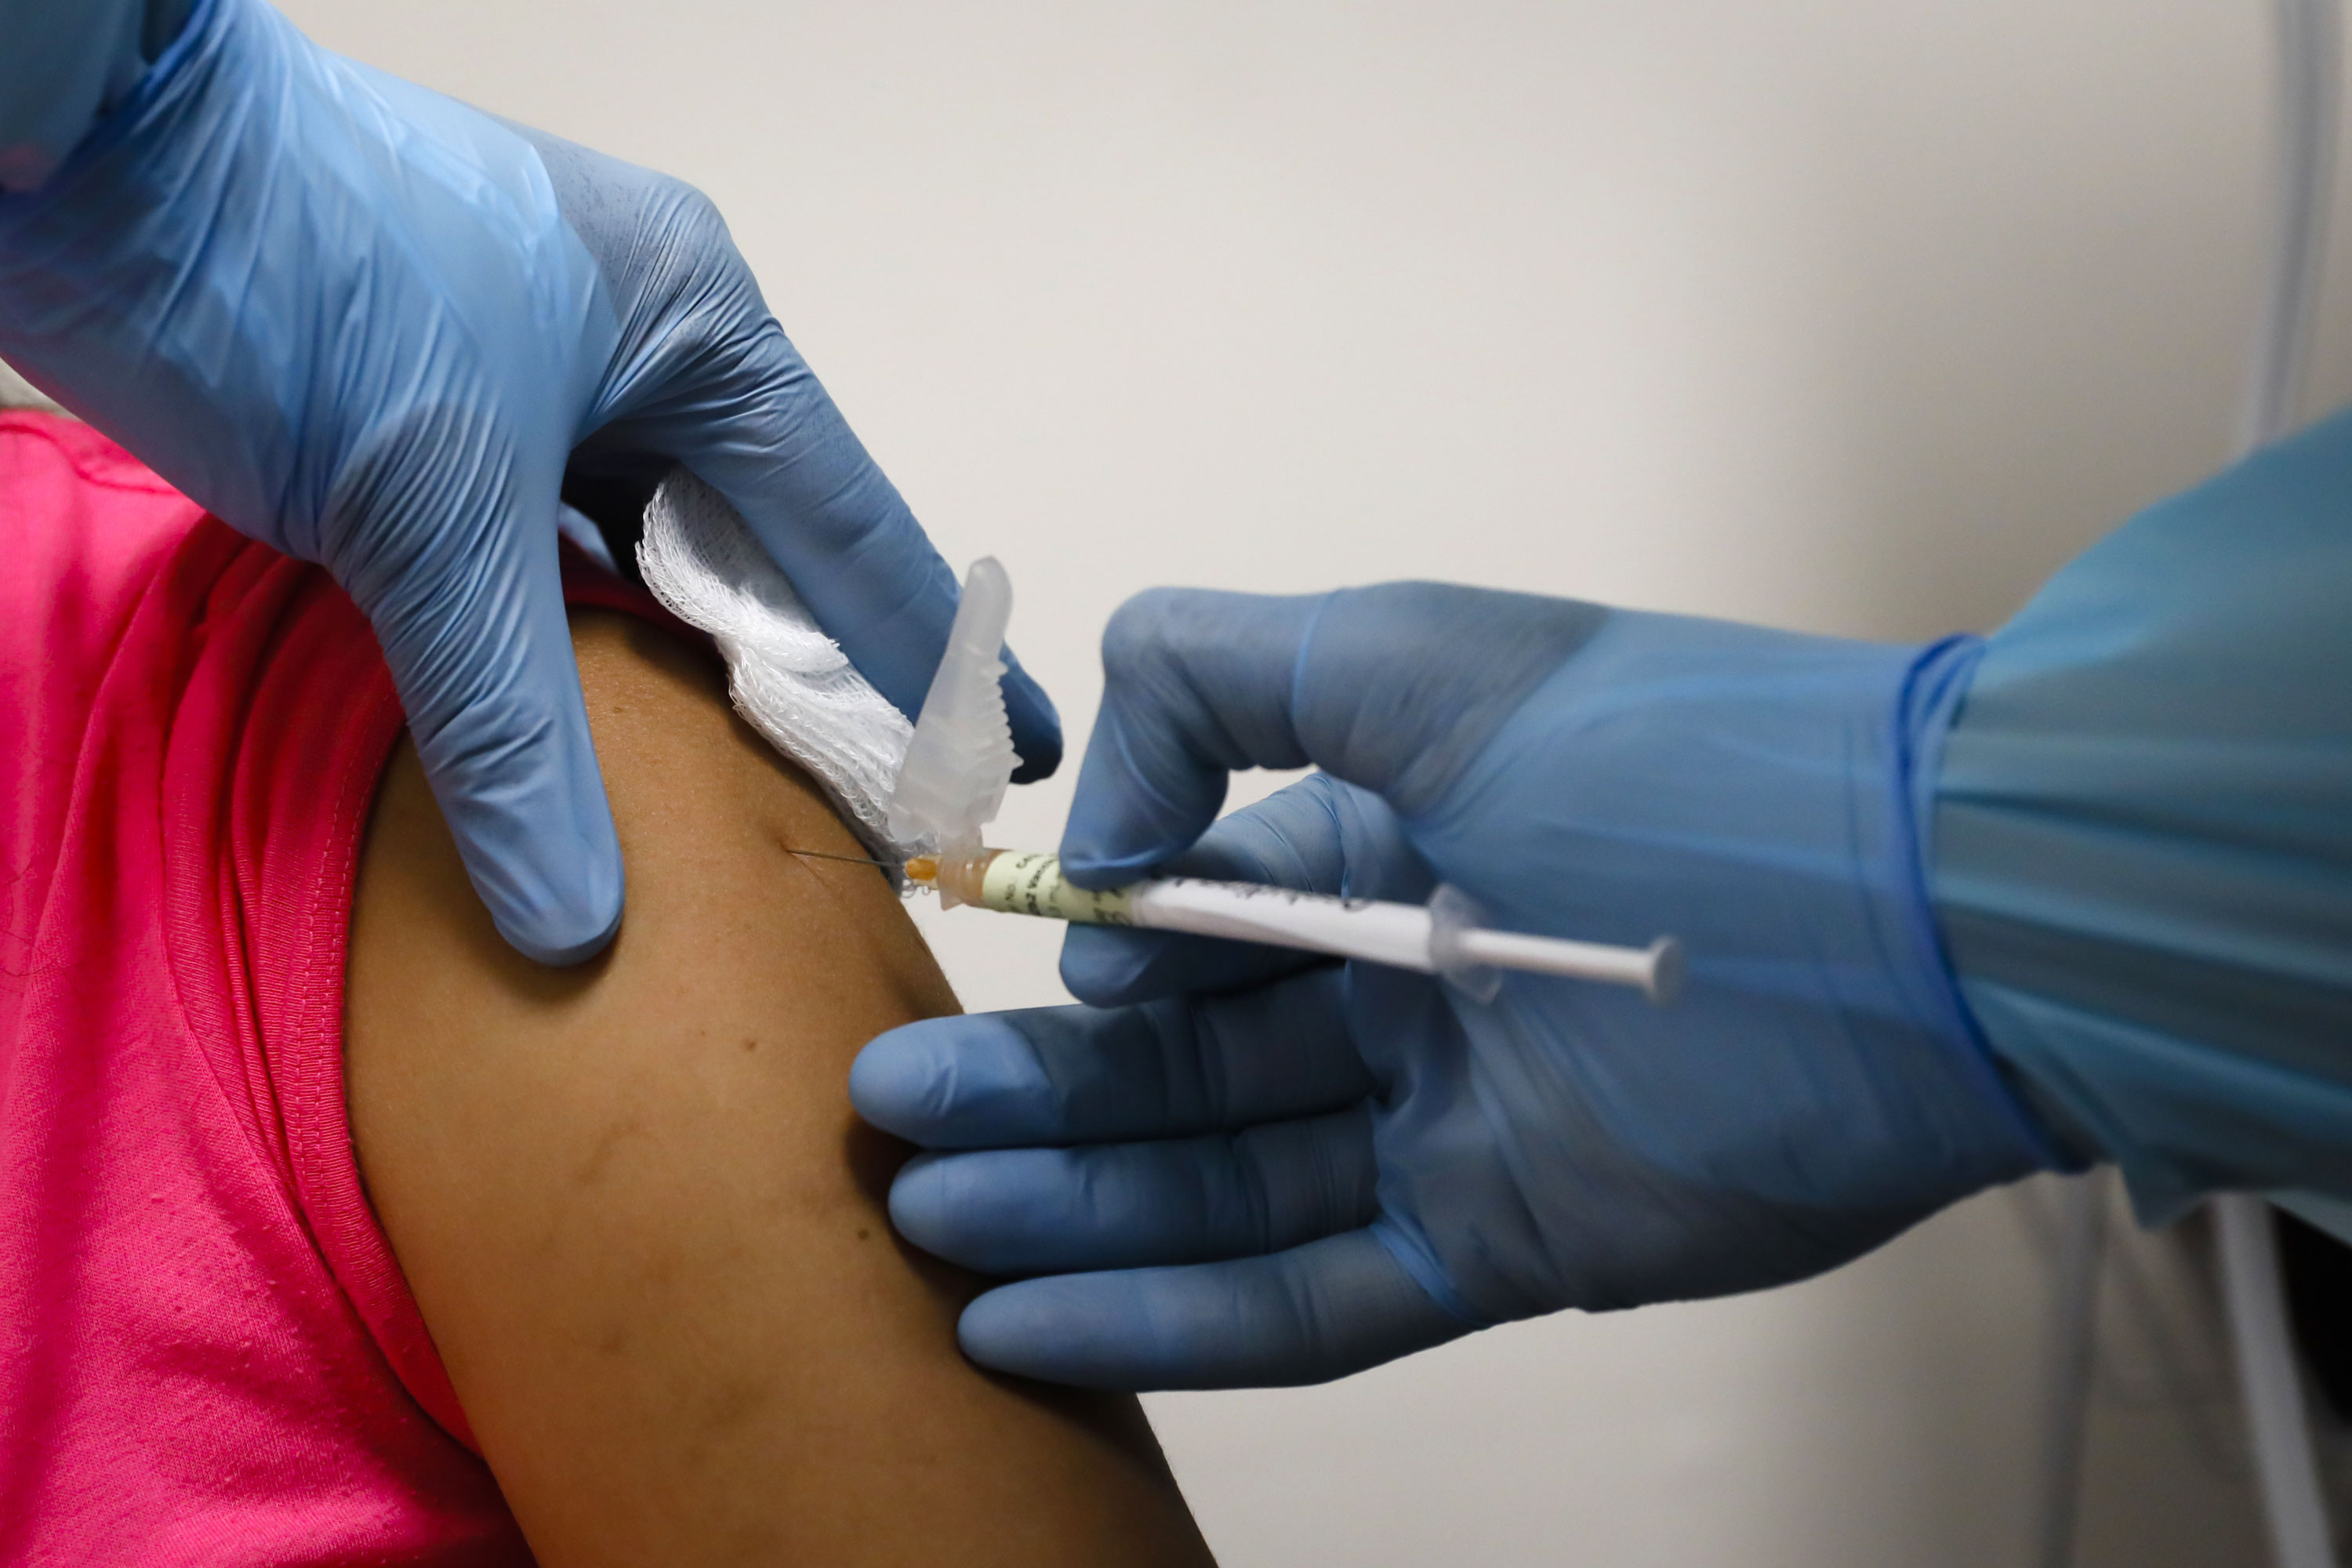 A health worker in Hollywood, Florida, injects someone during clinical trials for a Covid-19 vaccine on September 9.